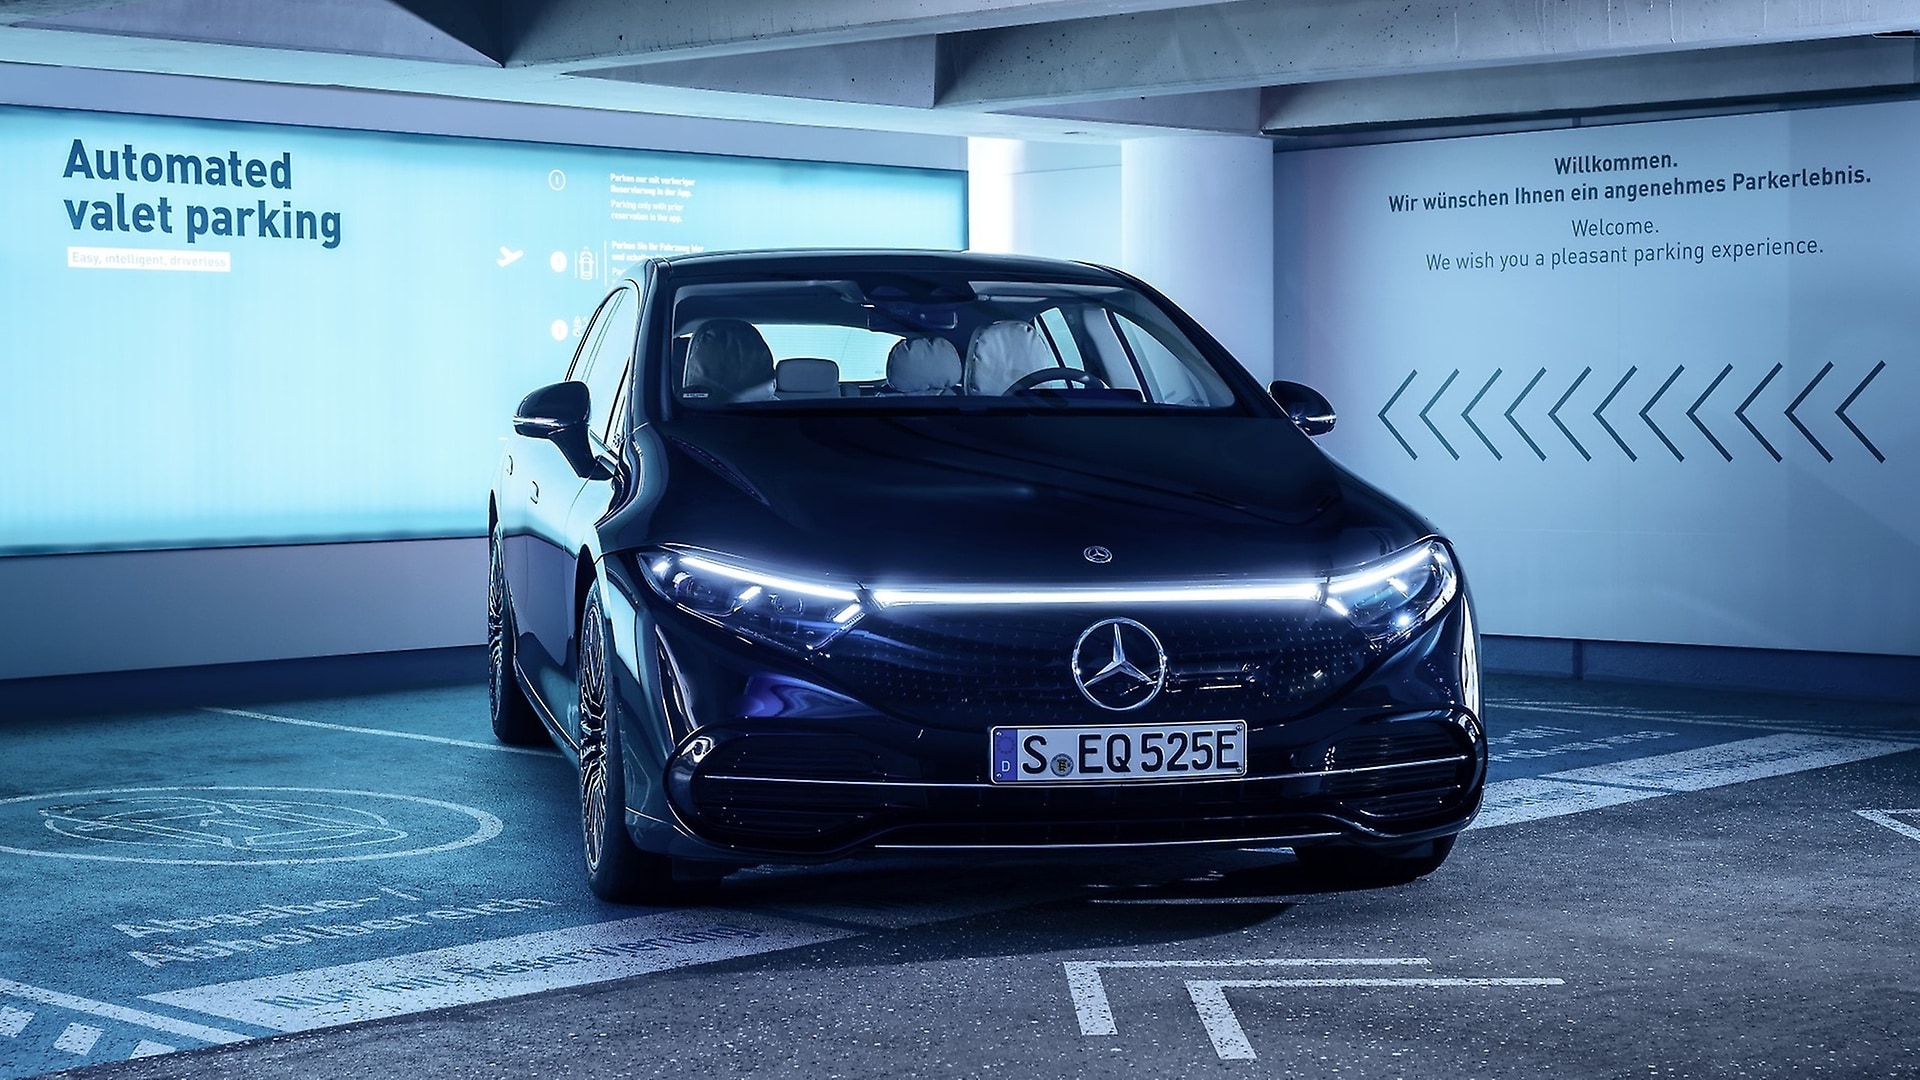 Mercedes-Benz has received official approval for commercial use in Germany for the “automated valet parking” service, which has been developed together with the technology partner Bosch.